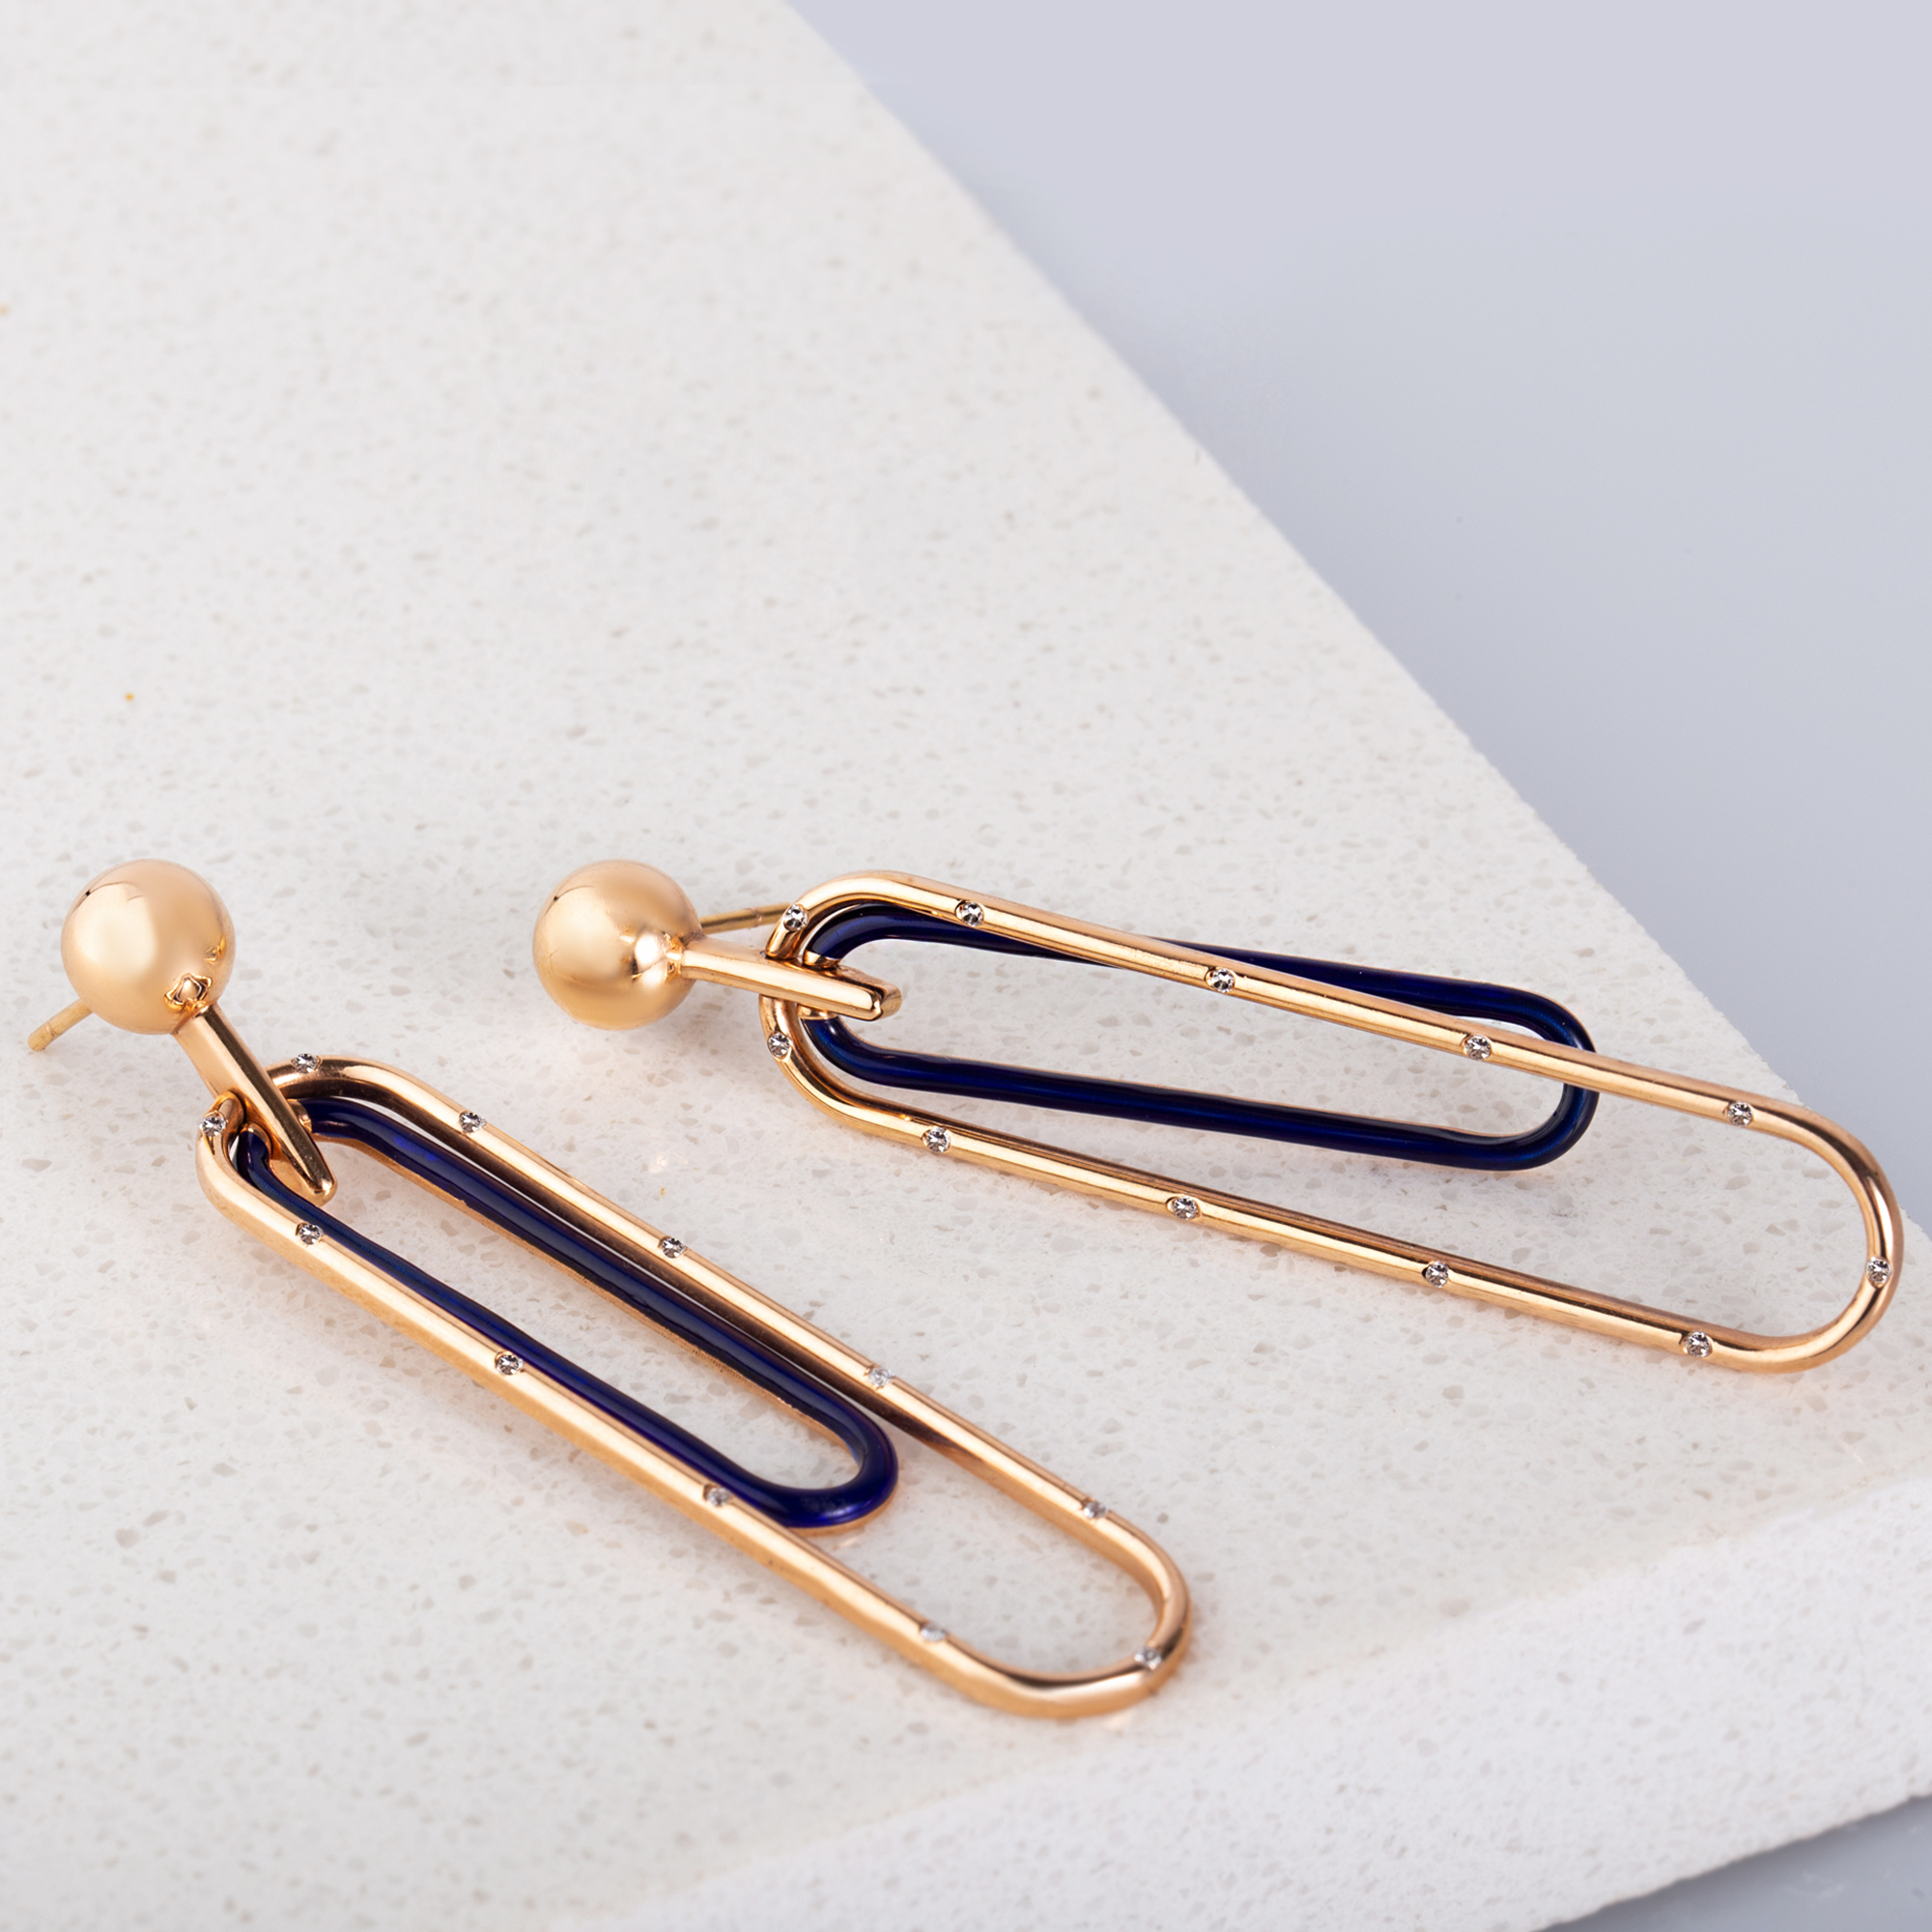 Paper clip earrings dressed with diamonds, blue enameled. - melina ...